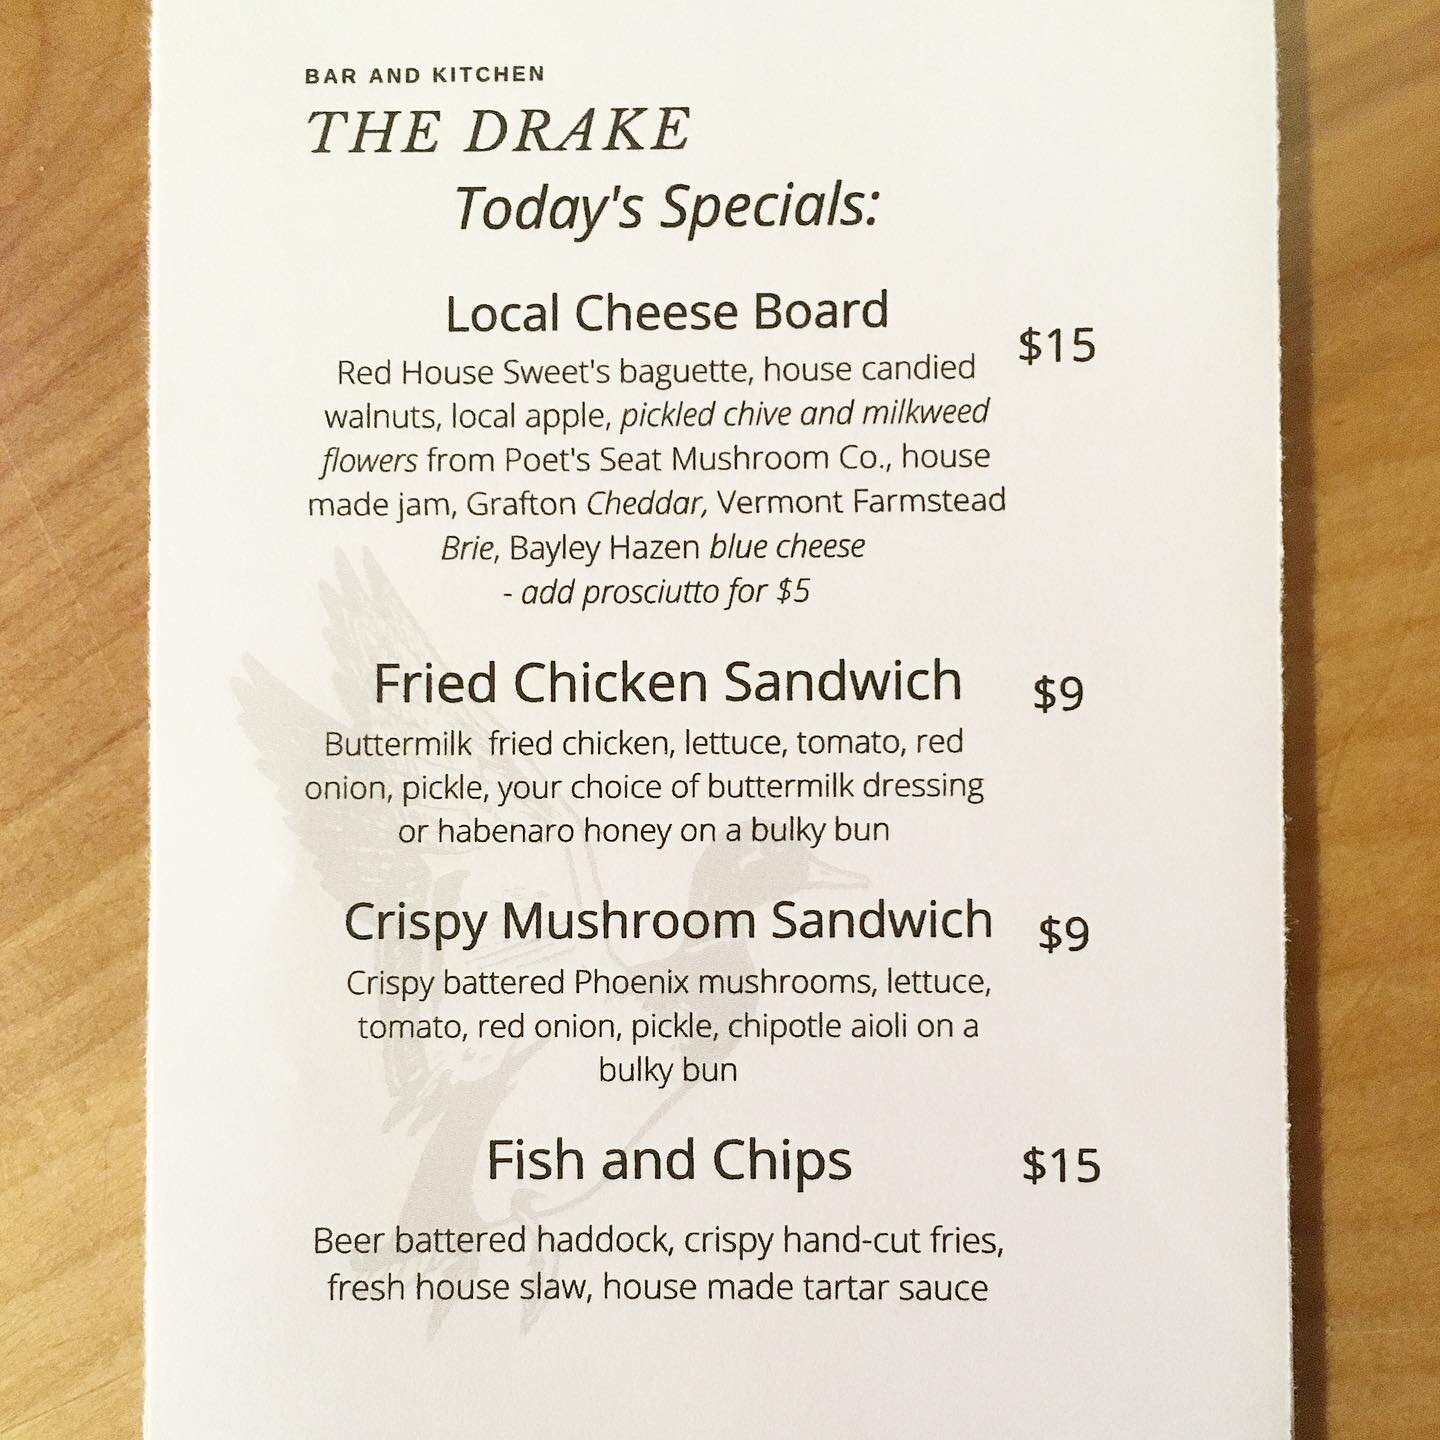 It&rsquo;s Fry-day ya&rsquo;ll!!! 🥳
Come celebrate at the Drake and treat yourself ❤️ 
#supportsmallbusiness  #Vermontfood #treatyoself #selflove #yummyfood #comfortfood #friedchicken #friedfish #crispymushrooms #tastyoptions #takeabreak #eatwell #e